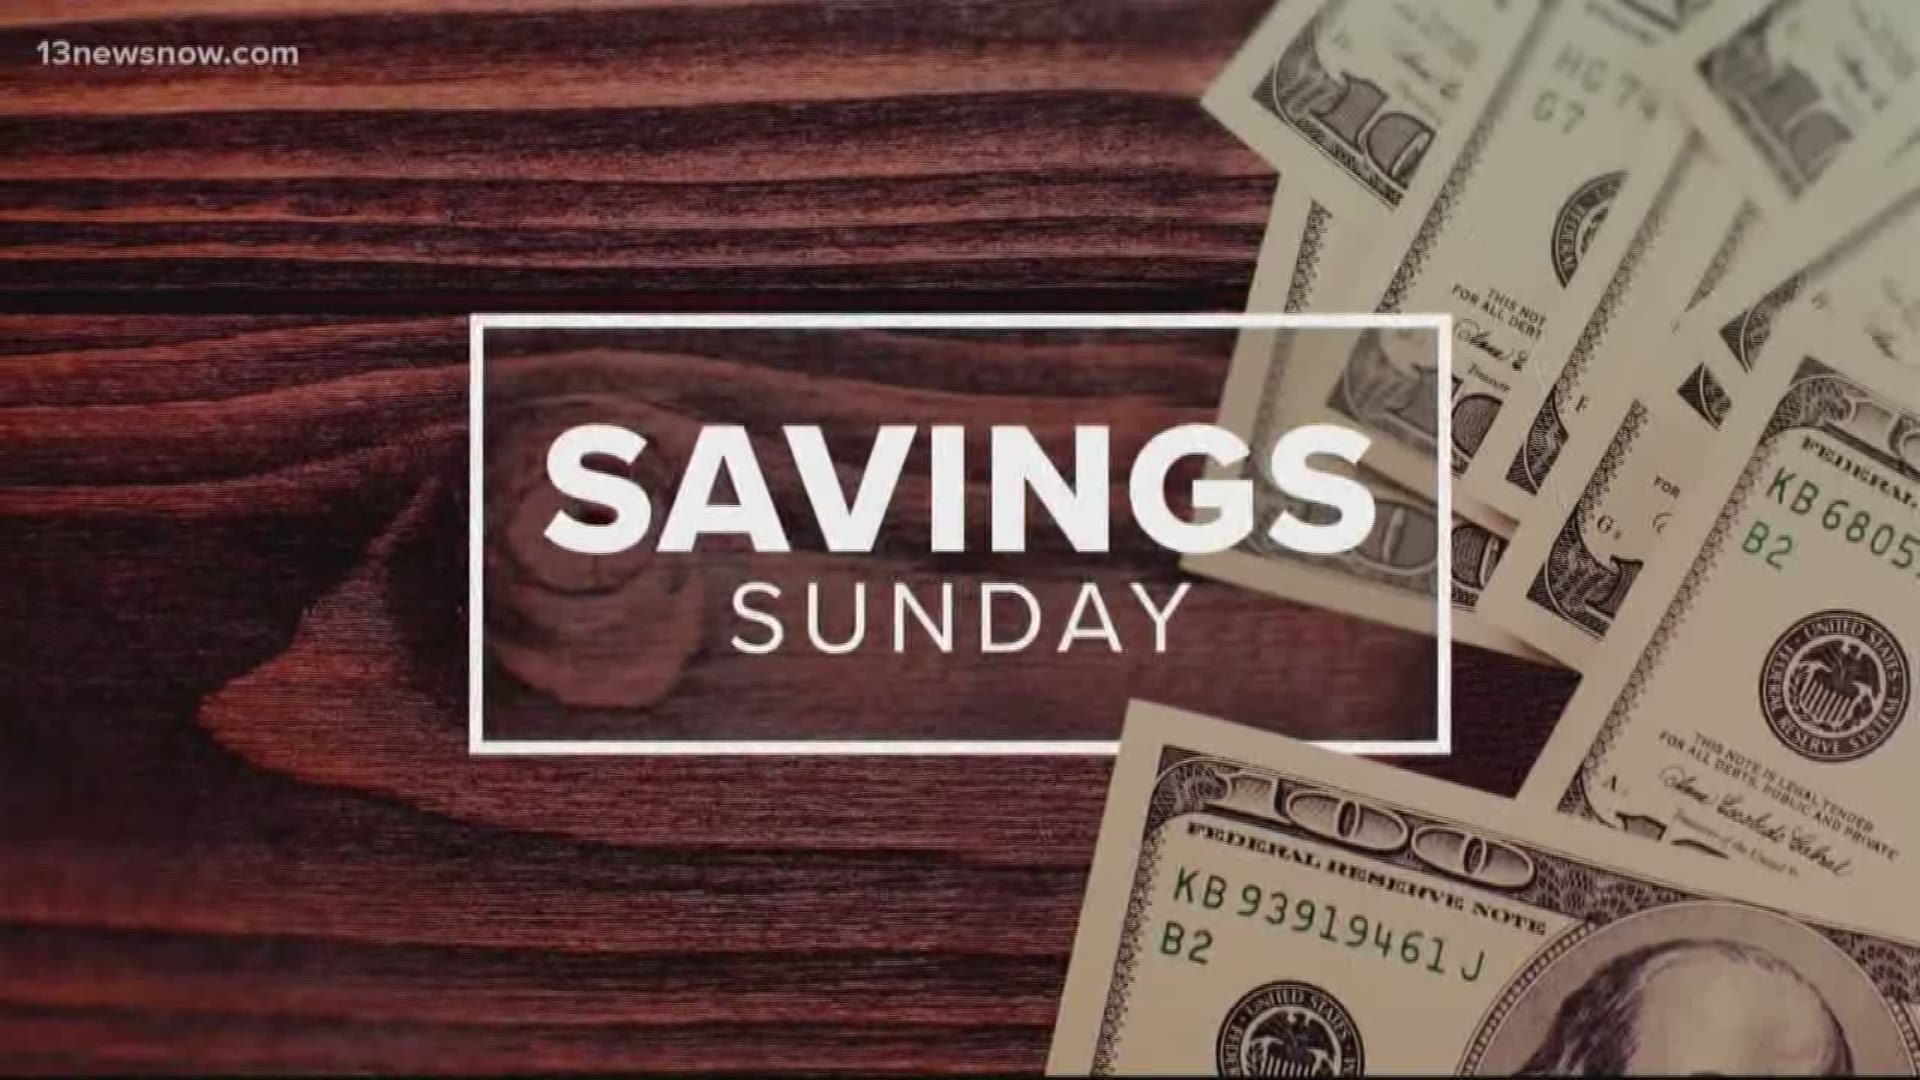 Laura Oliver from www.afrugalchick.com has your big savings for the week of Aug. 4, 2019.